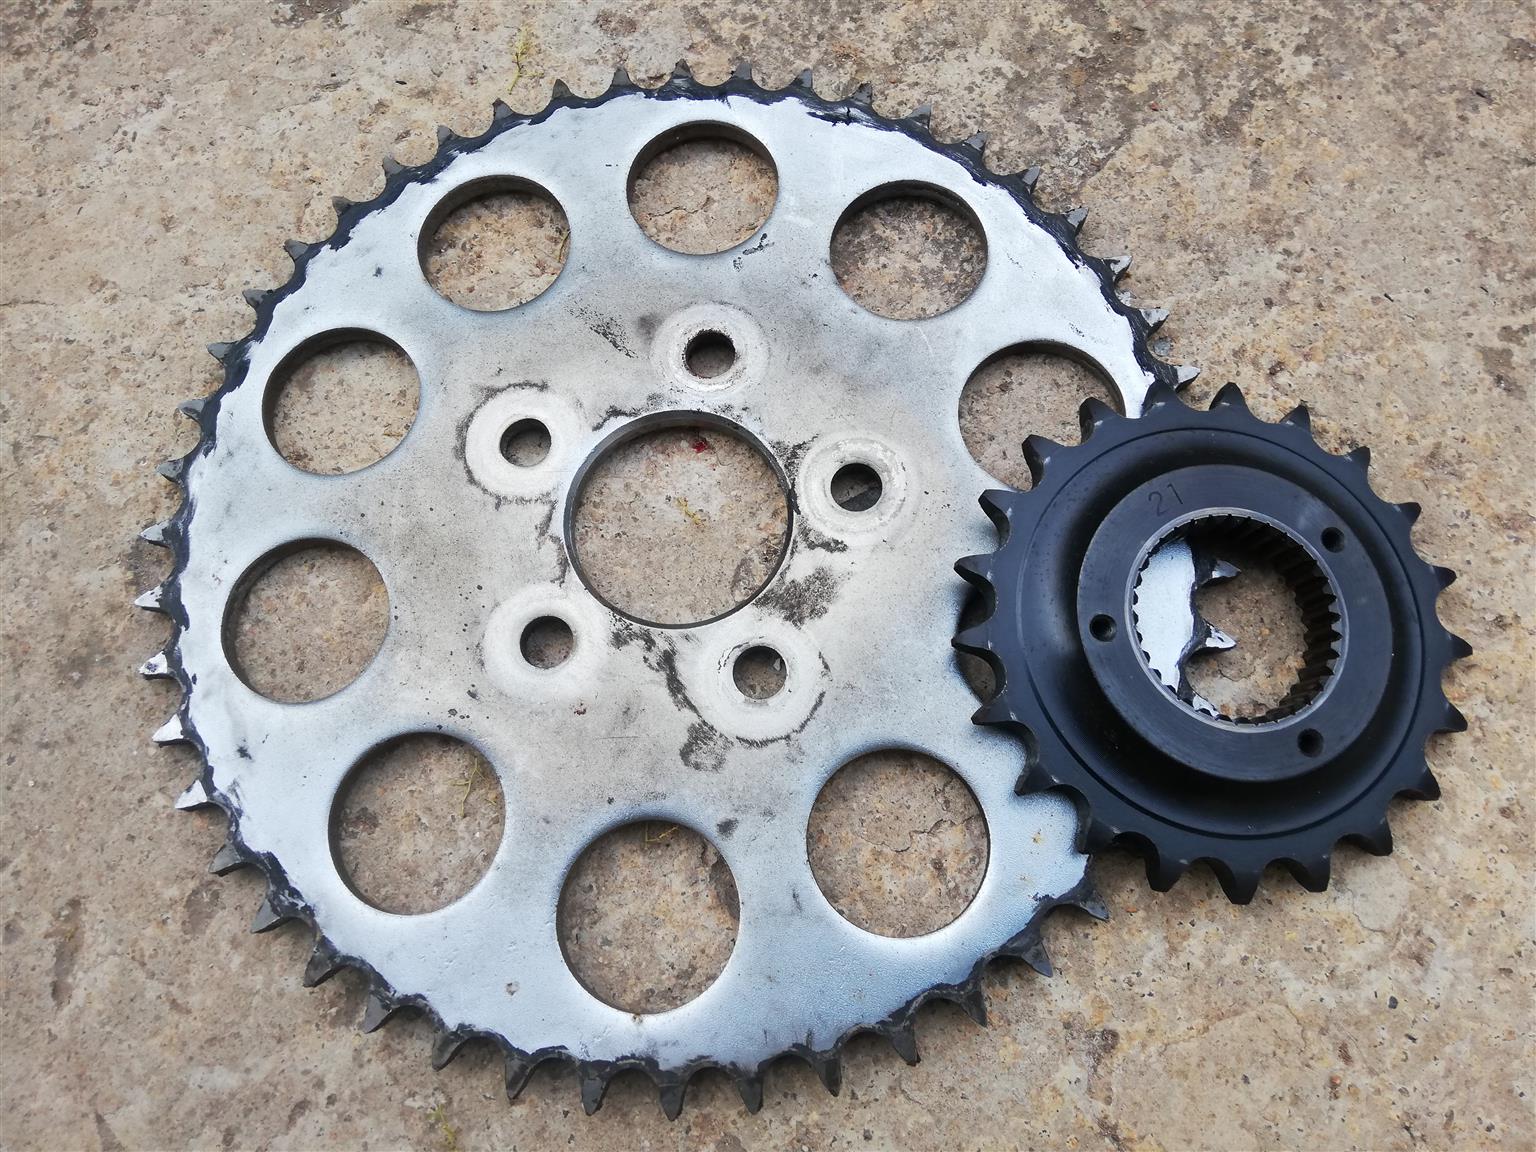 Harley Davidson Sportster chain and sprocket spare parts